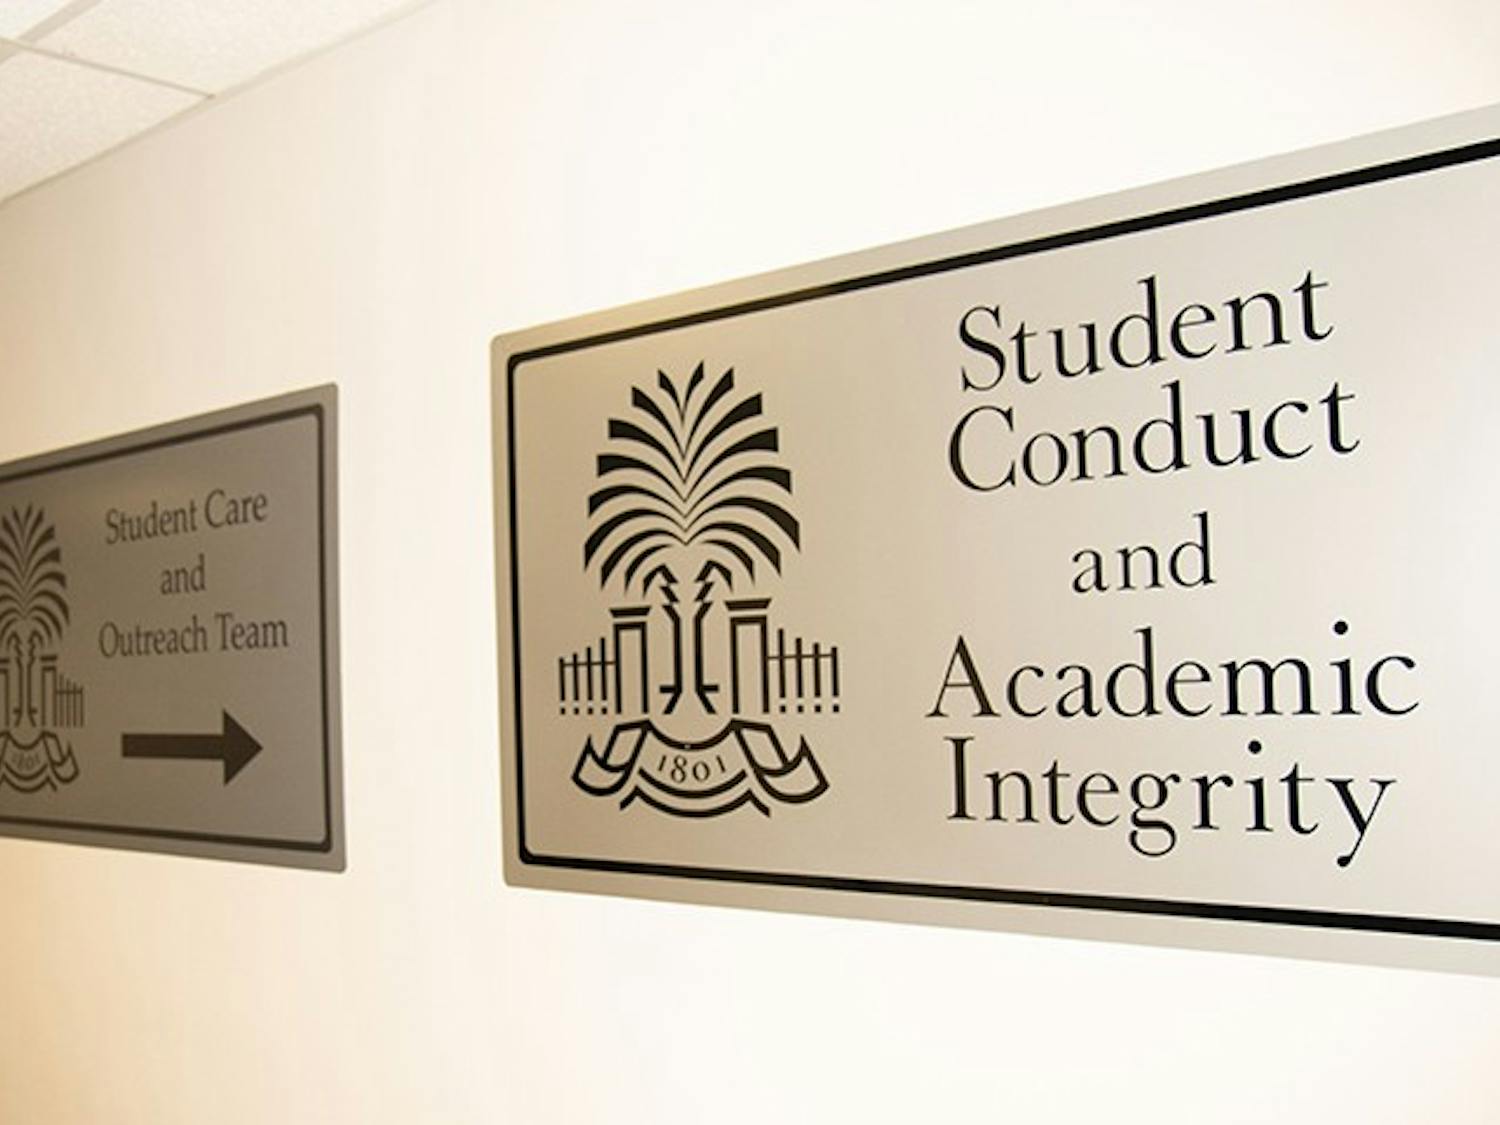 The sign outside of the Office of Student Conduct and Academic Integrity.